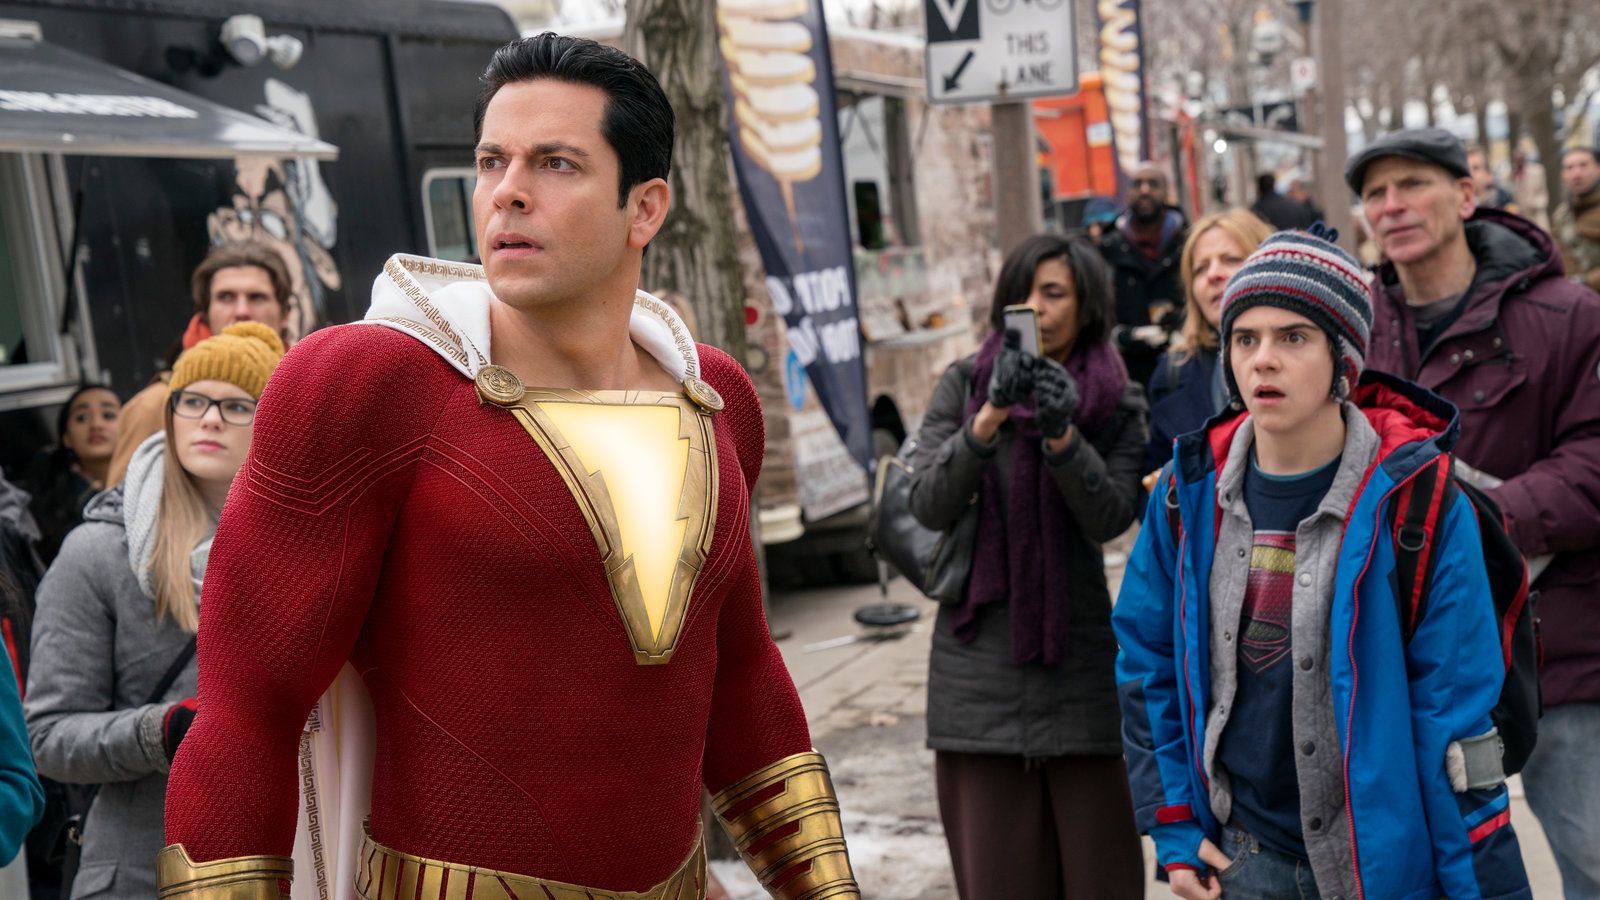 The Big Twist in 'Shazam!' Hides Another Fun Easter Egg